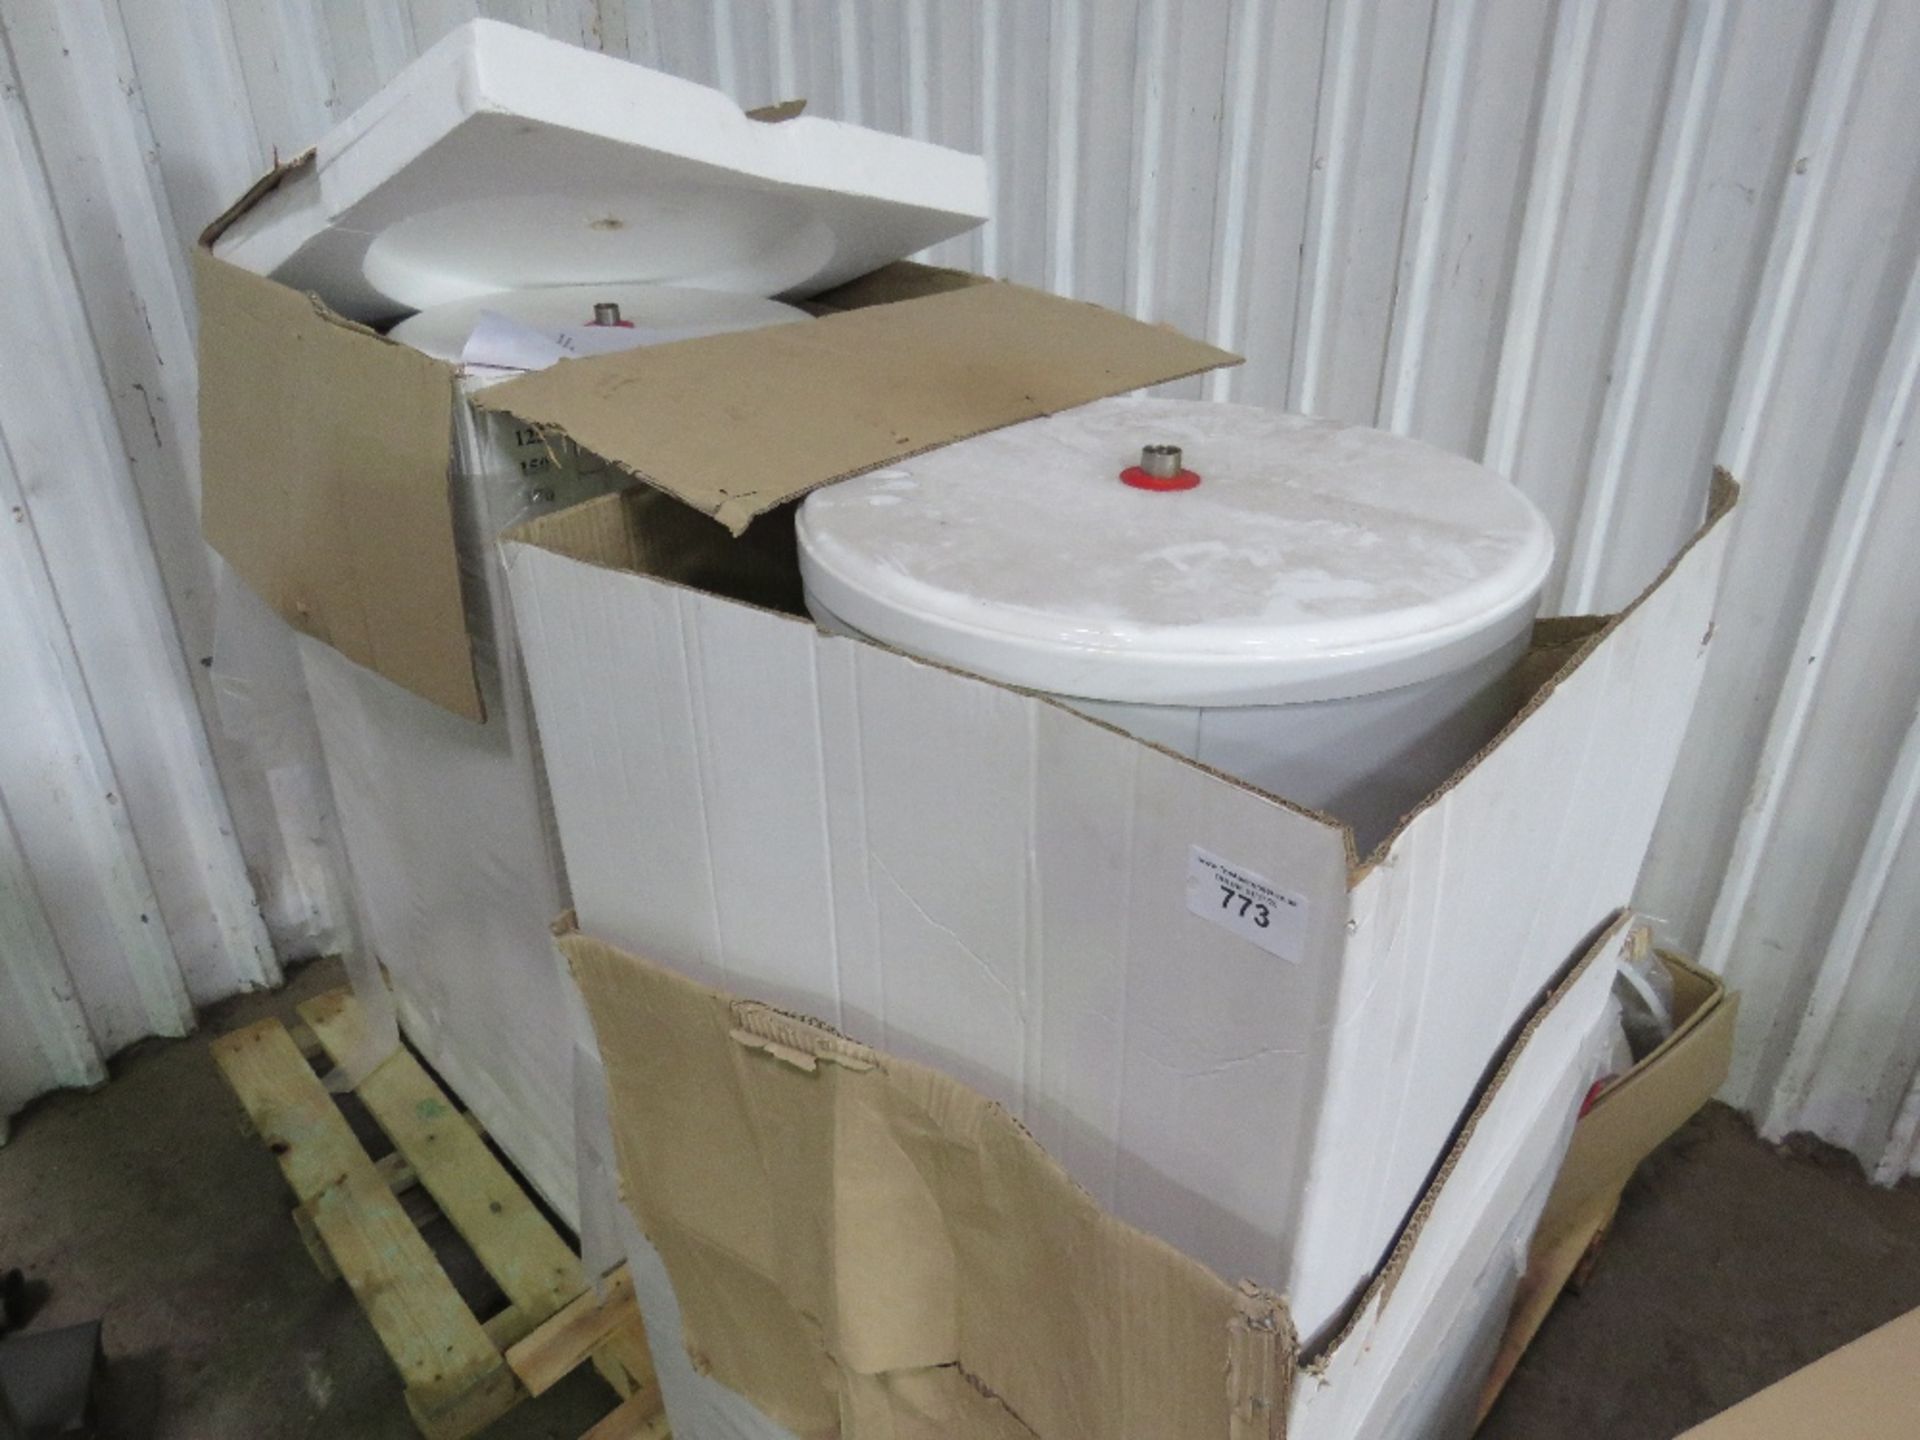 3 X PALLETS OF HEATING EQUIPMENT AS SHOWN